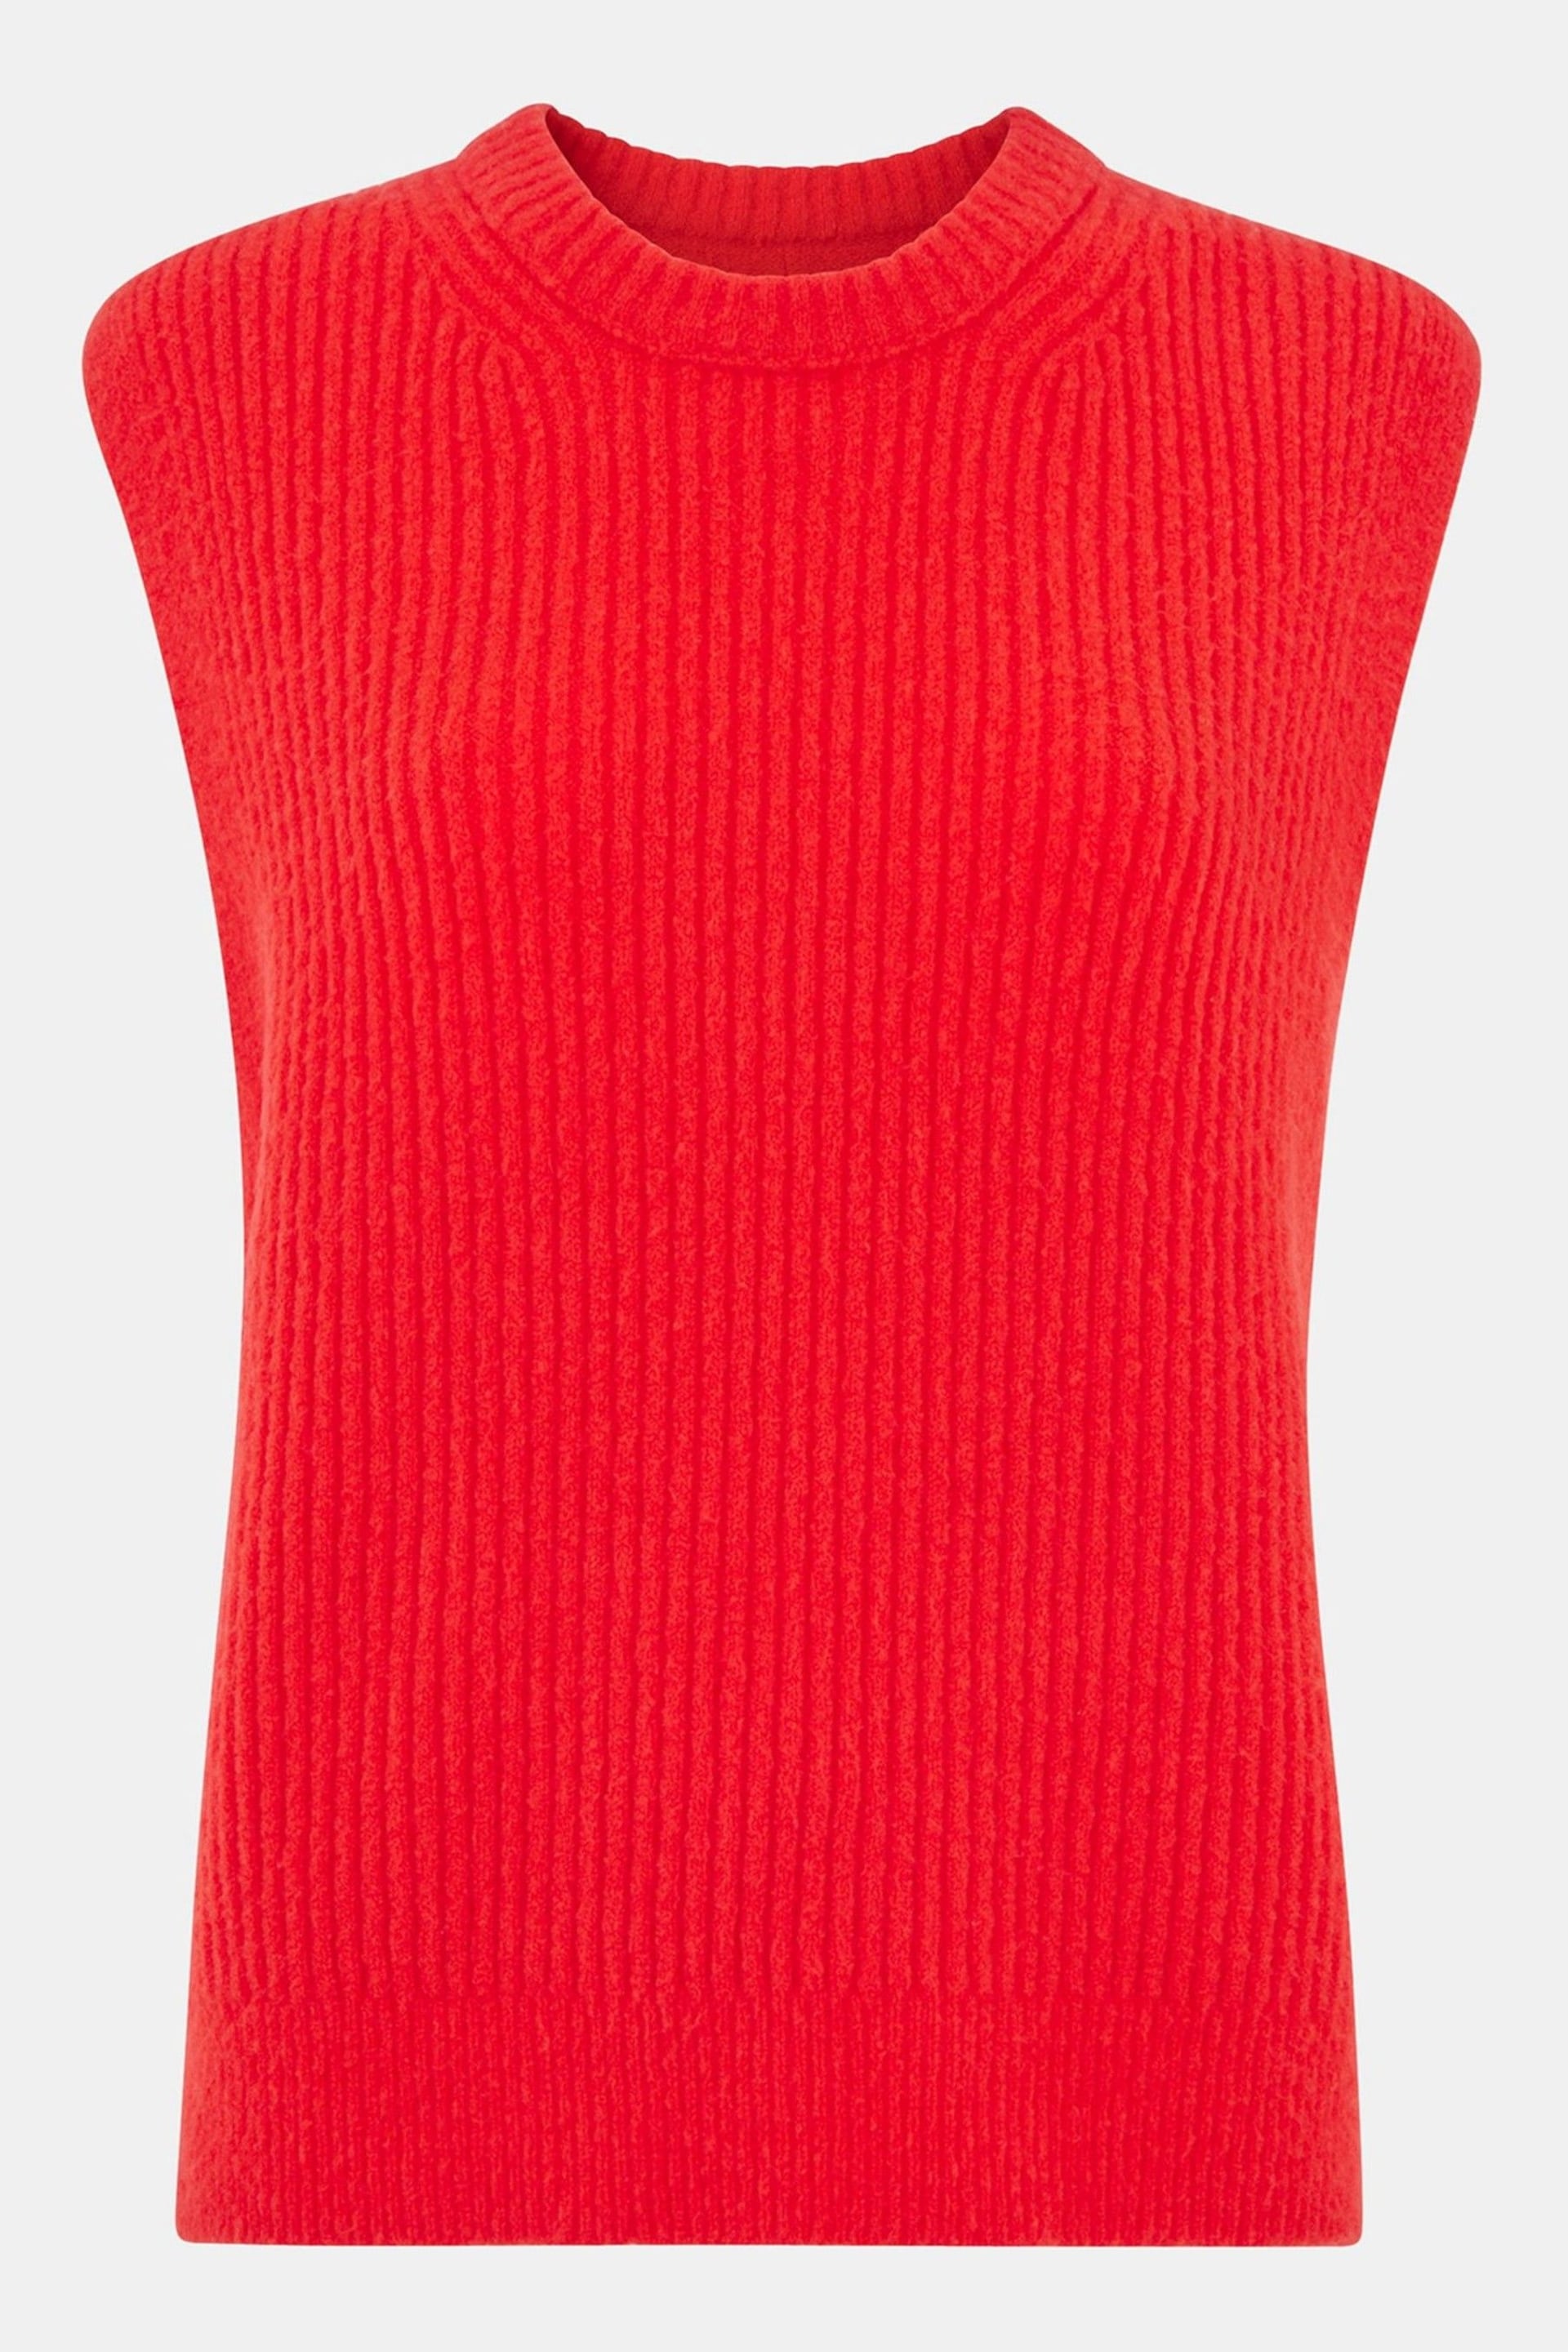 Whistles Red Textured Rib Tank - Image 5 of 5